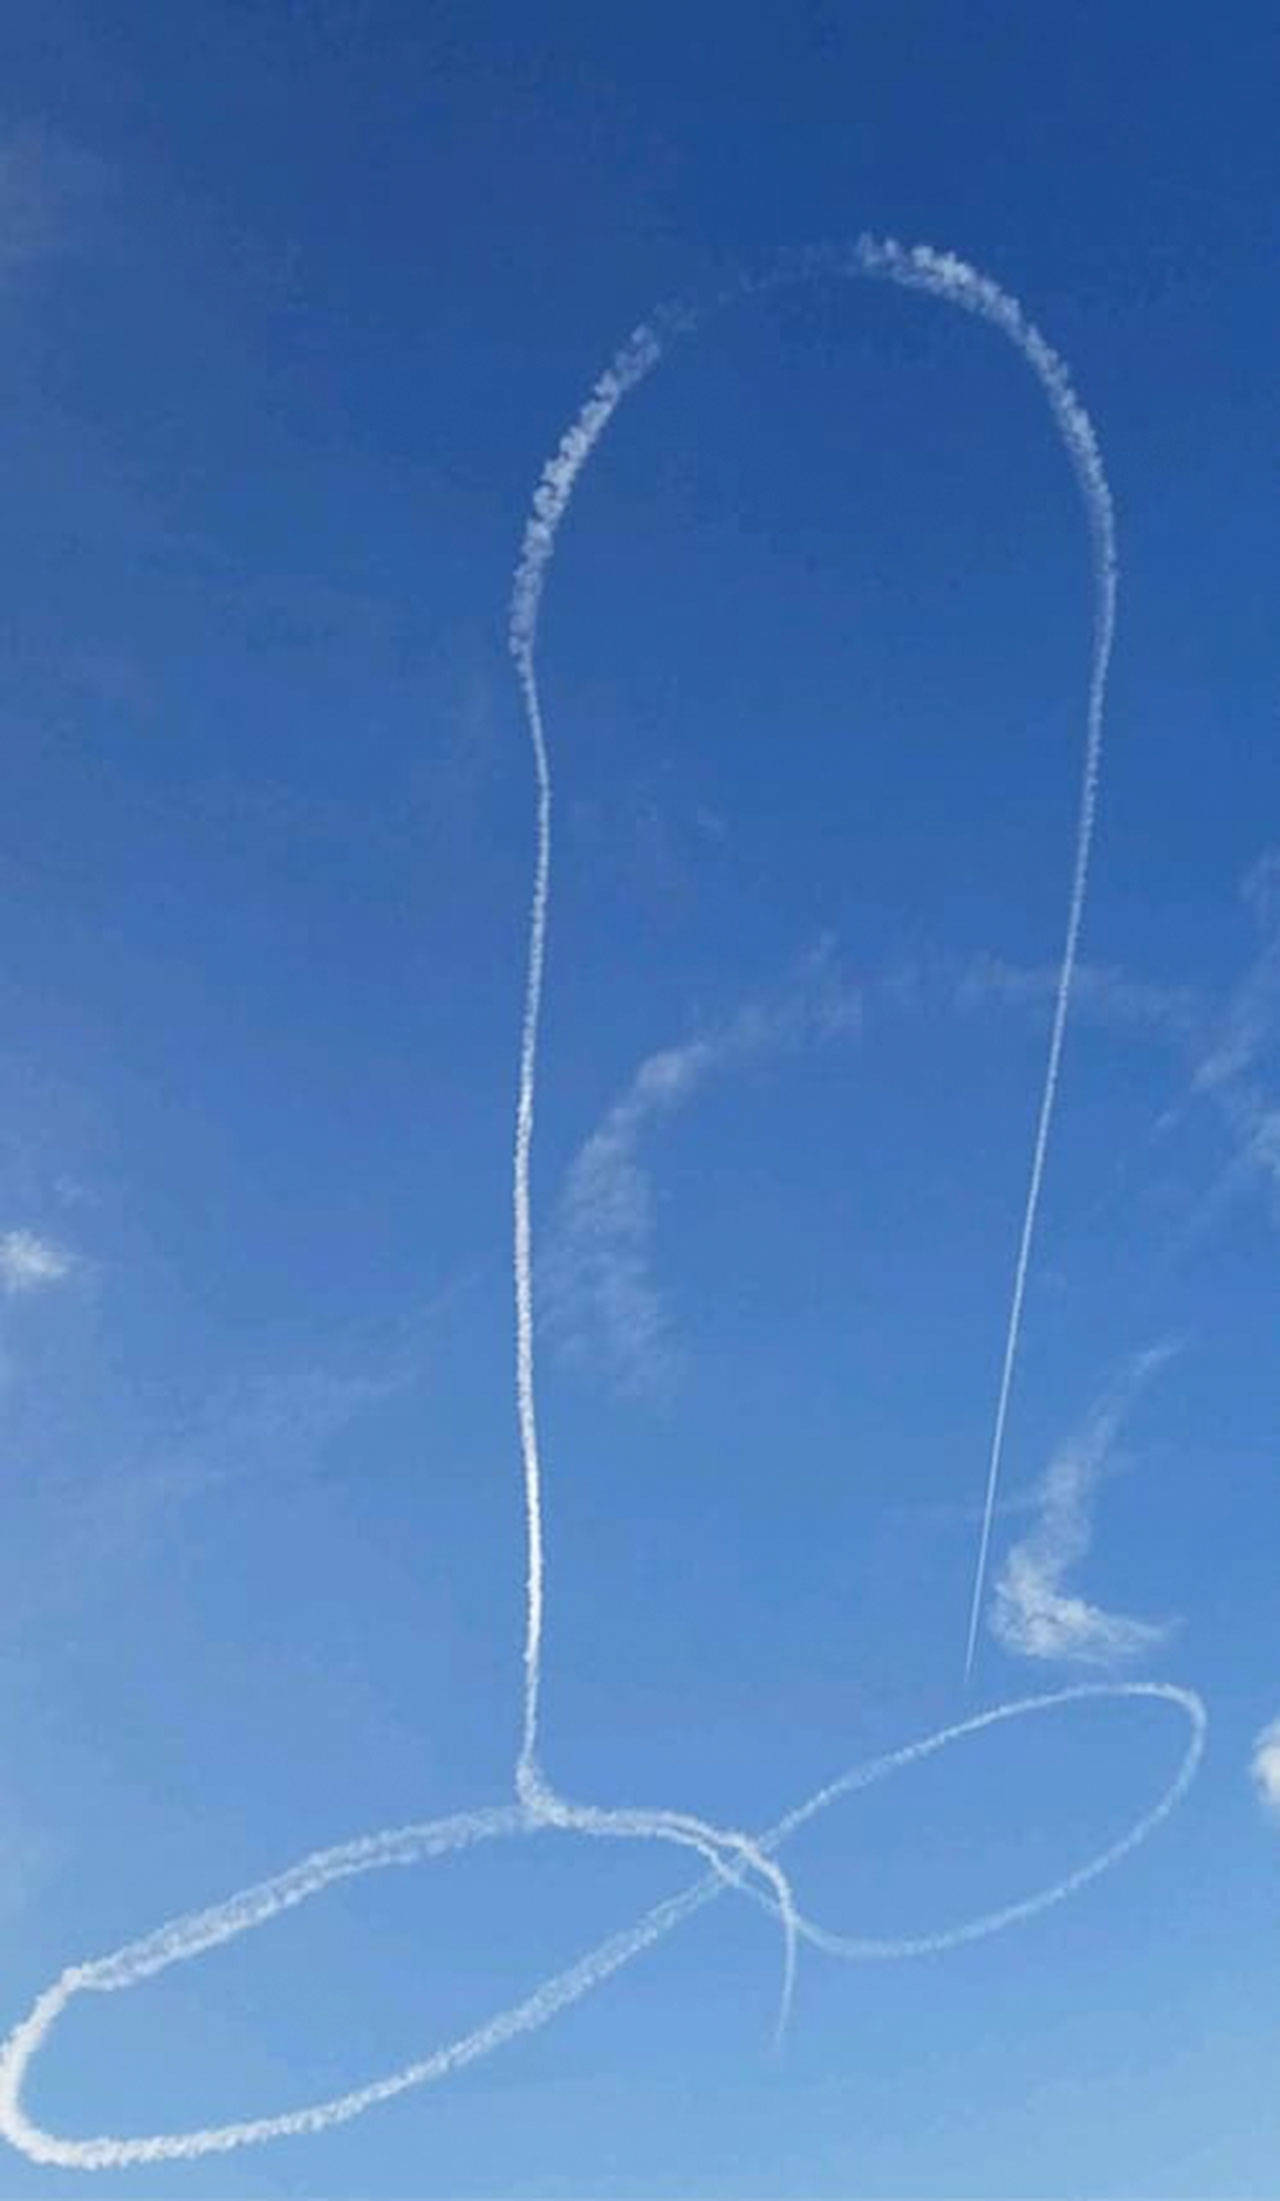 Navy admitted that Growler pilot drew inappropriate image in sky over Okanogan Thursday. As published in the &lt;em&gt;Spokesman Review&lt;/em&gt;